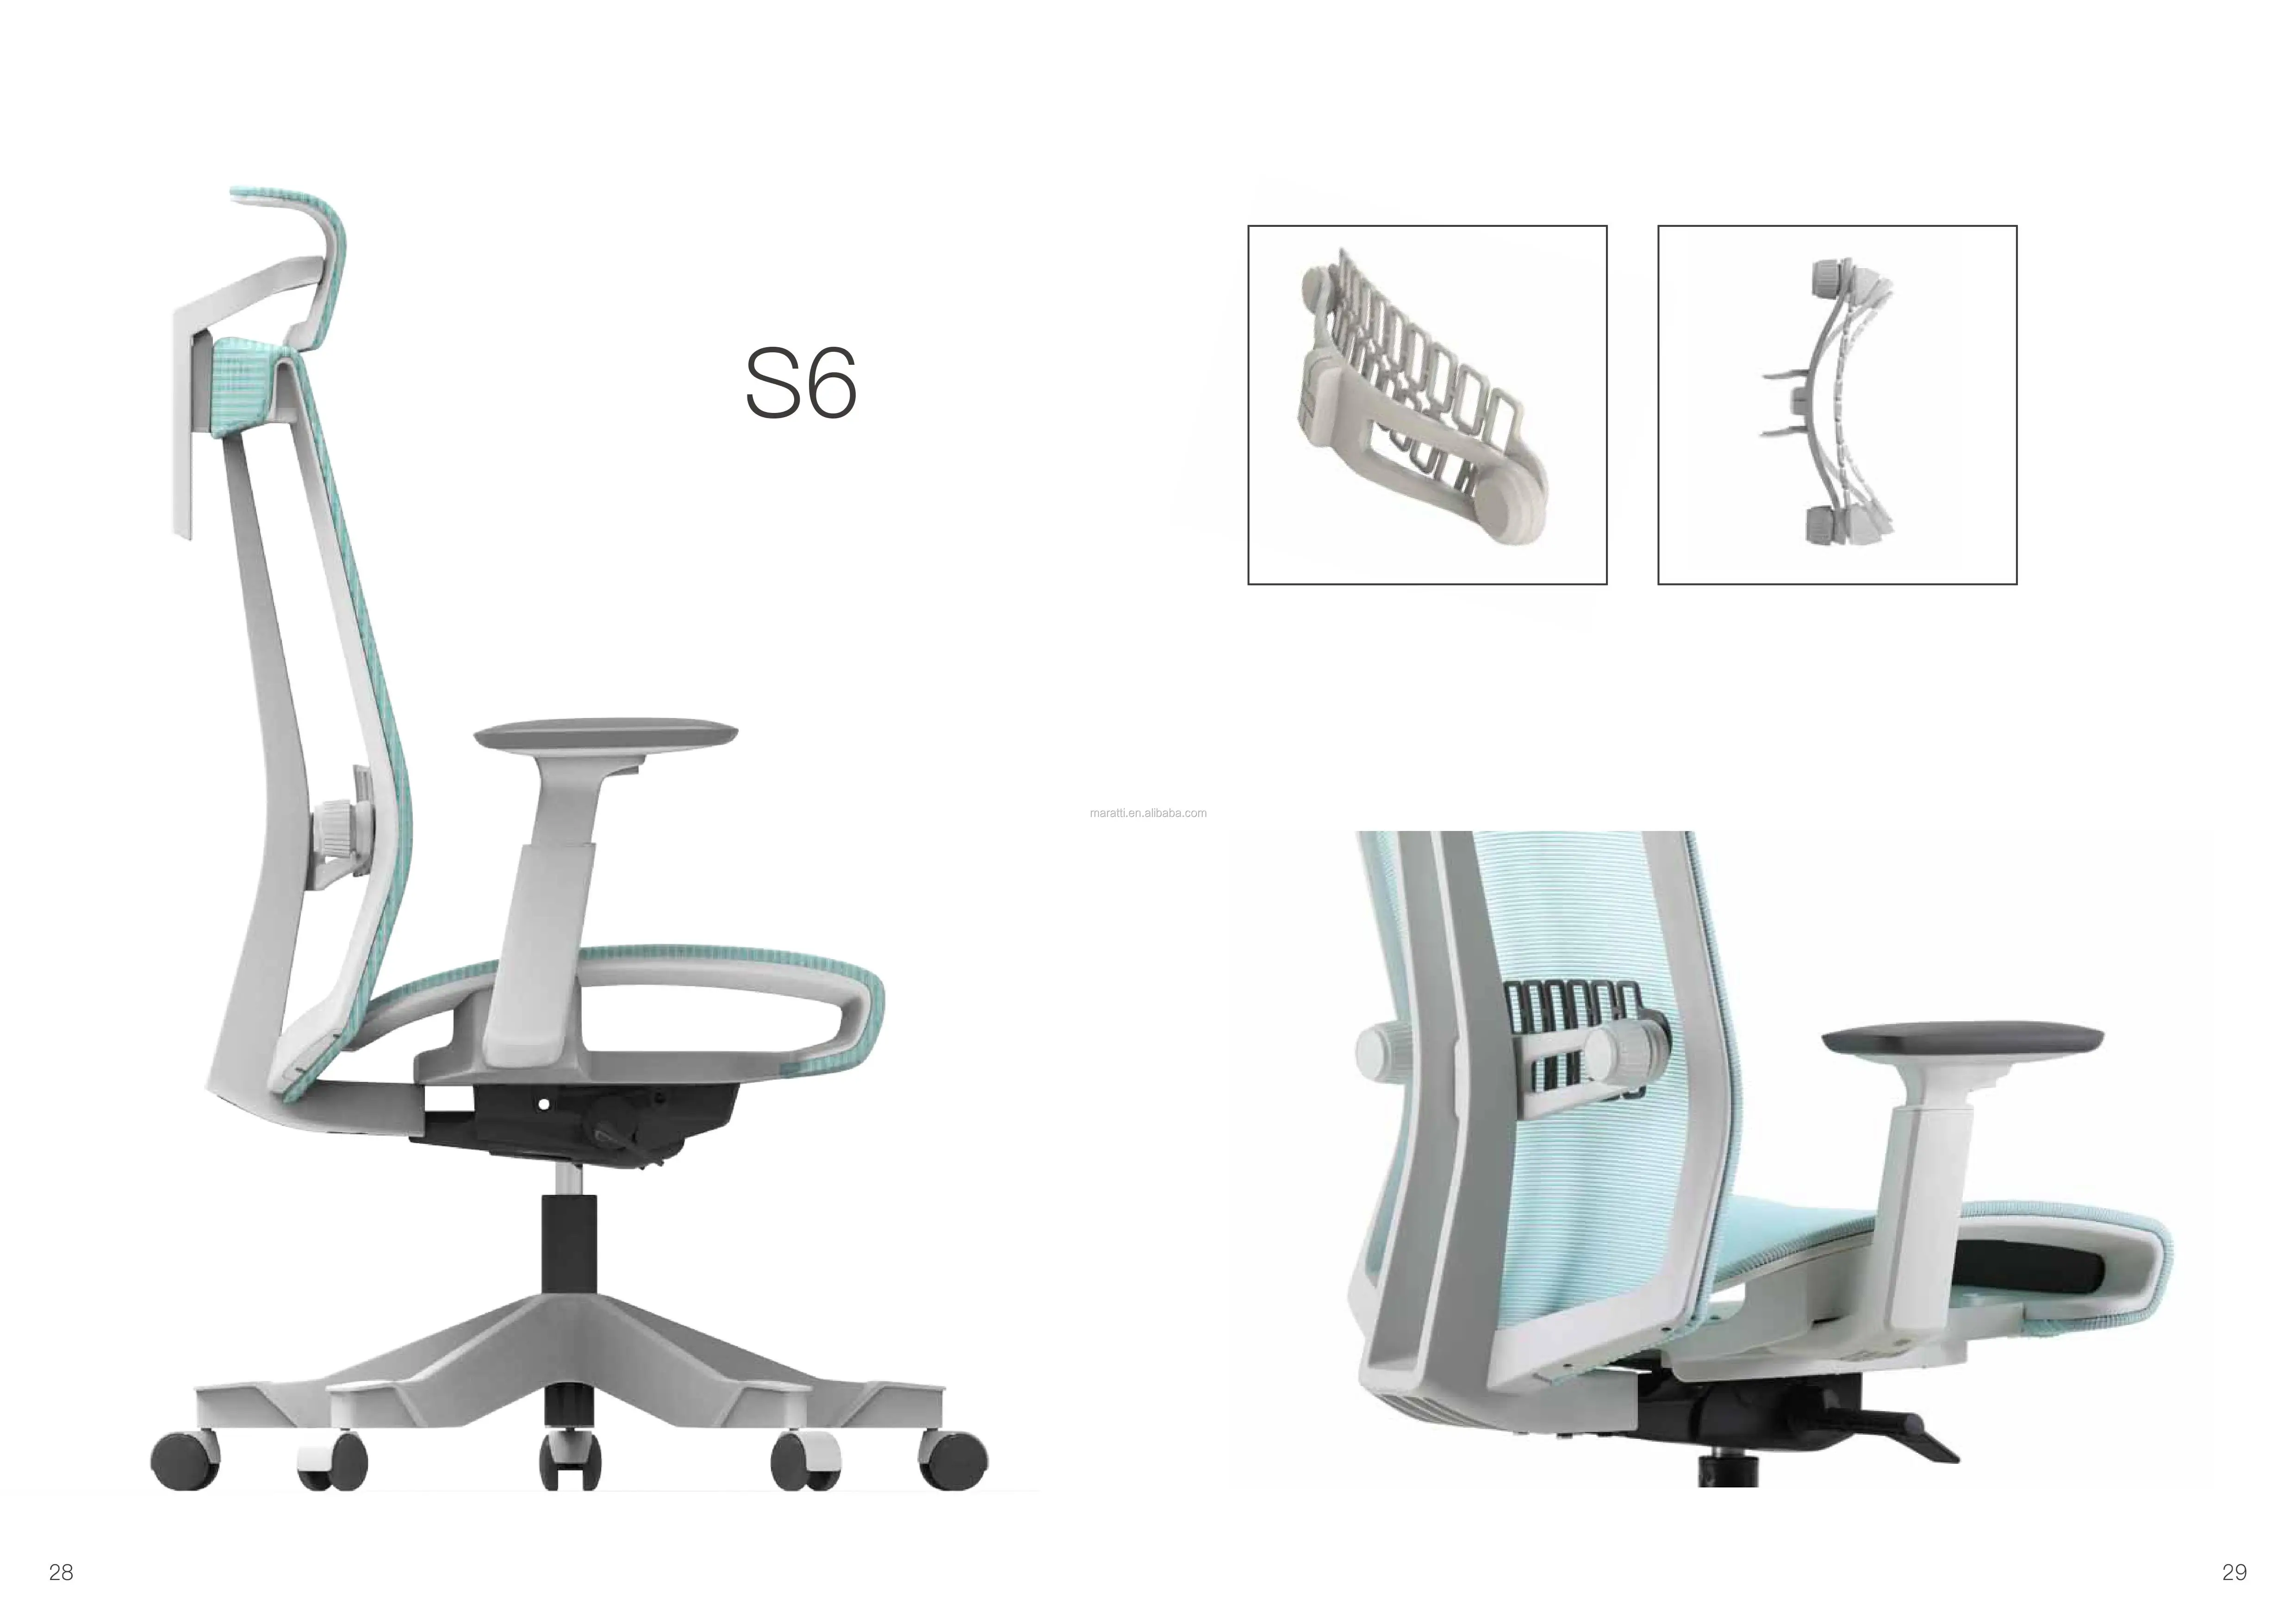 BIFMA high back conference mesh office chair